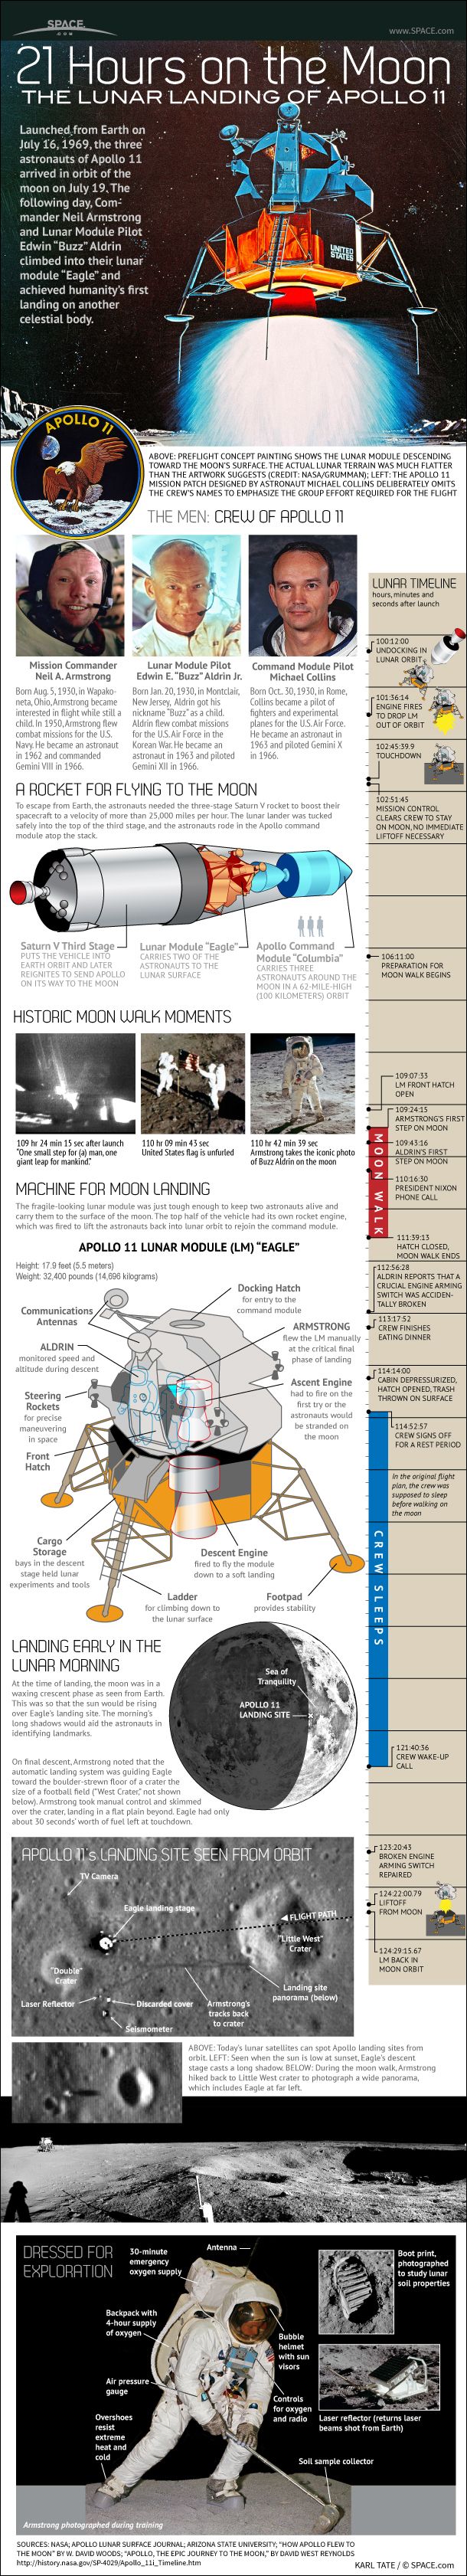 Apollo 11 Moon Landing: How It Worked (Infographic)